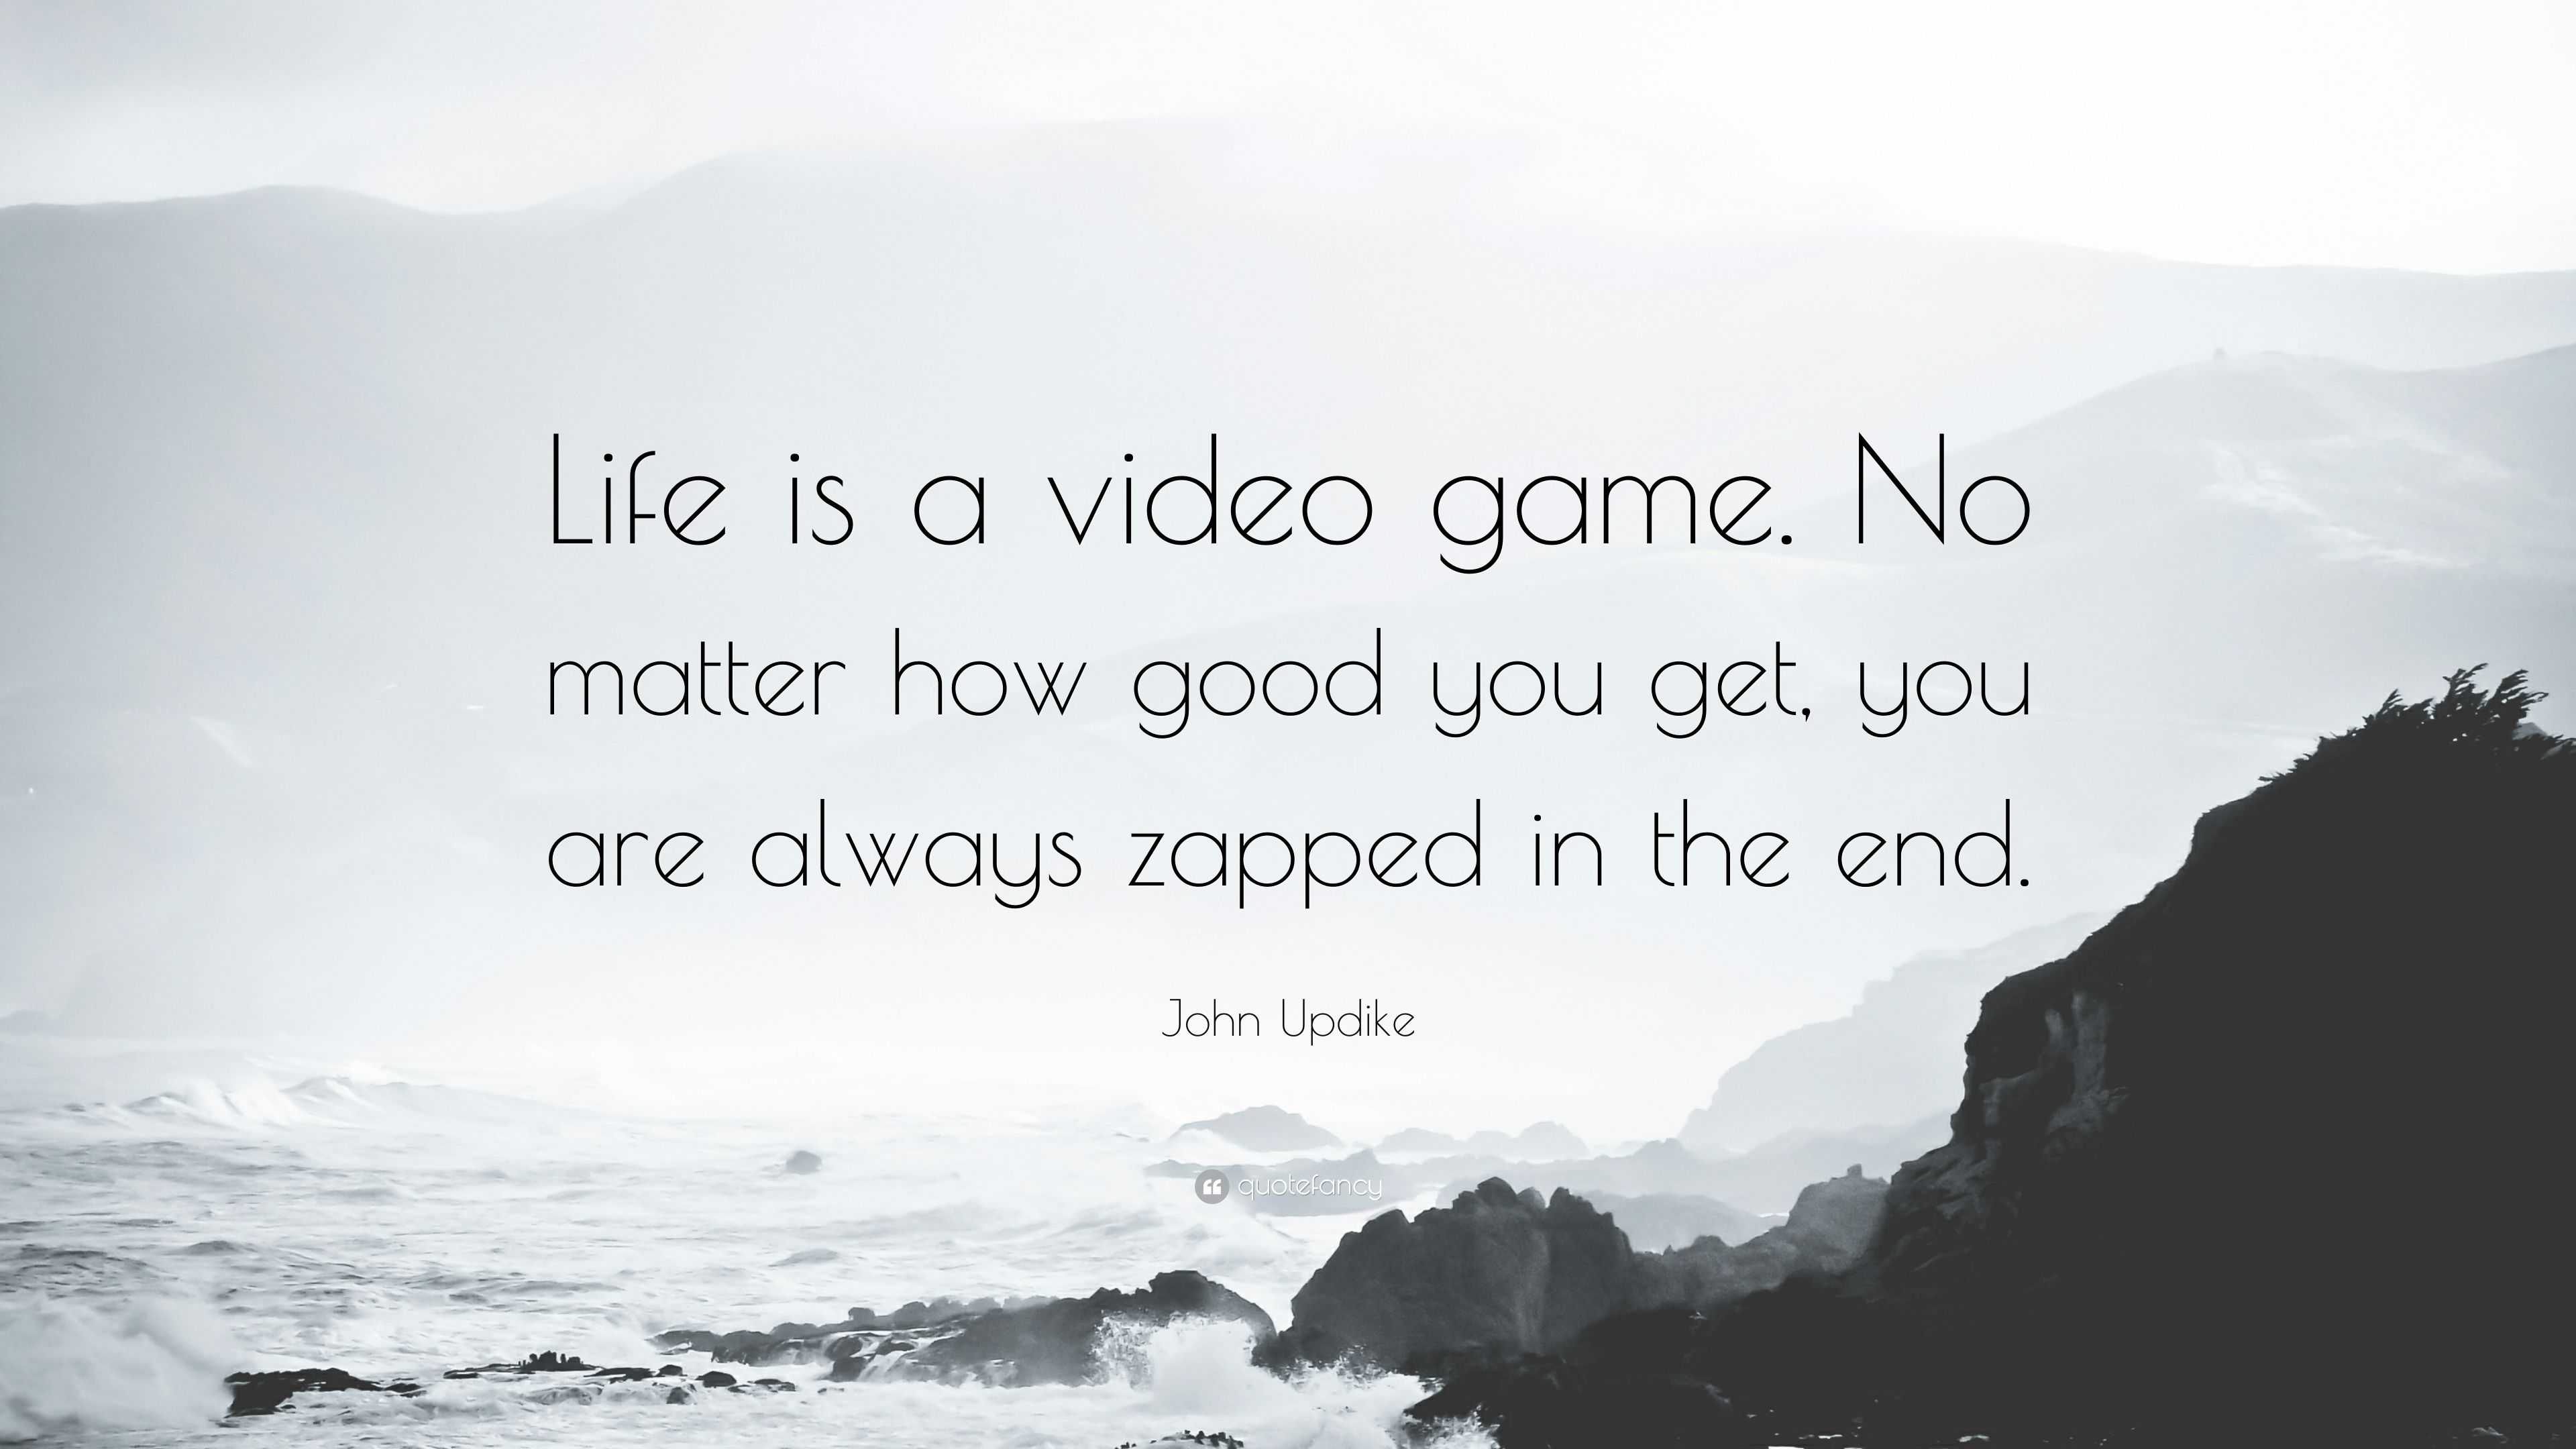 John Updike quote: Life is a video game. No matter how good you